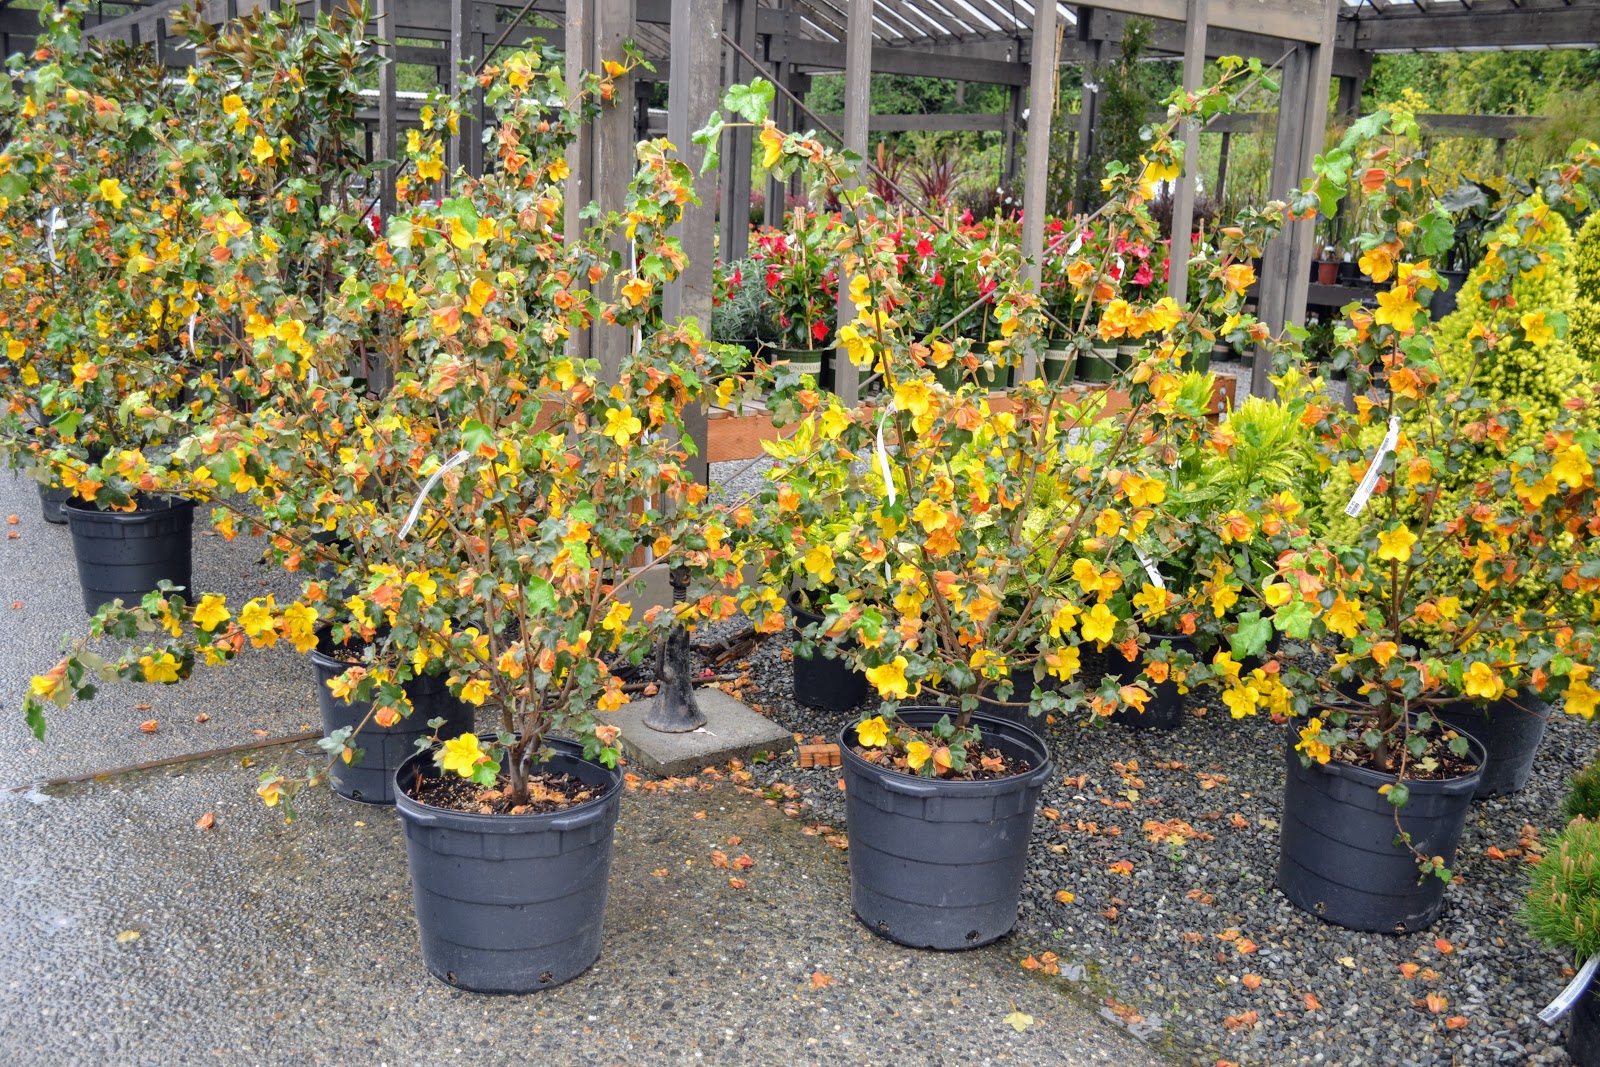 The Outlaw Gardener: Retail Therapy at Wells-Medina Nursery